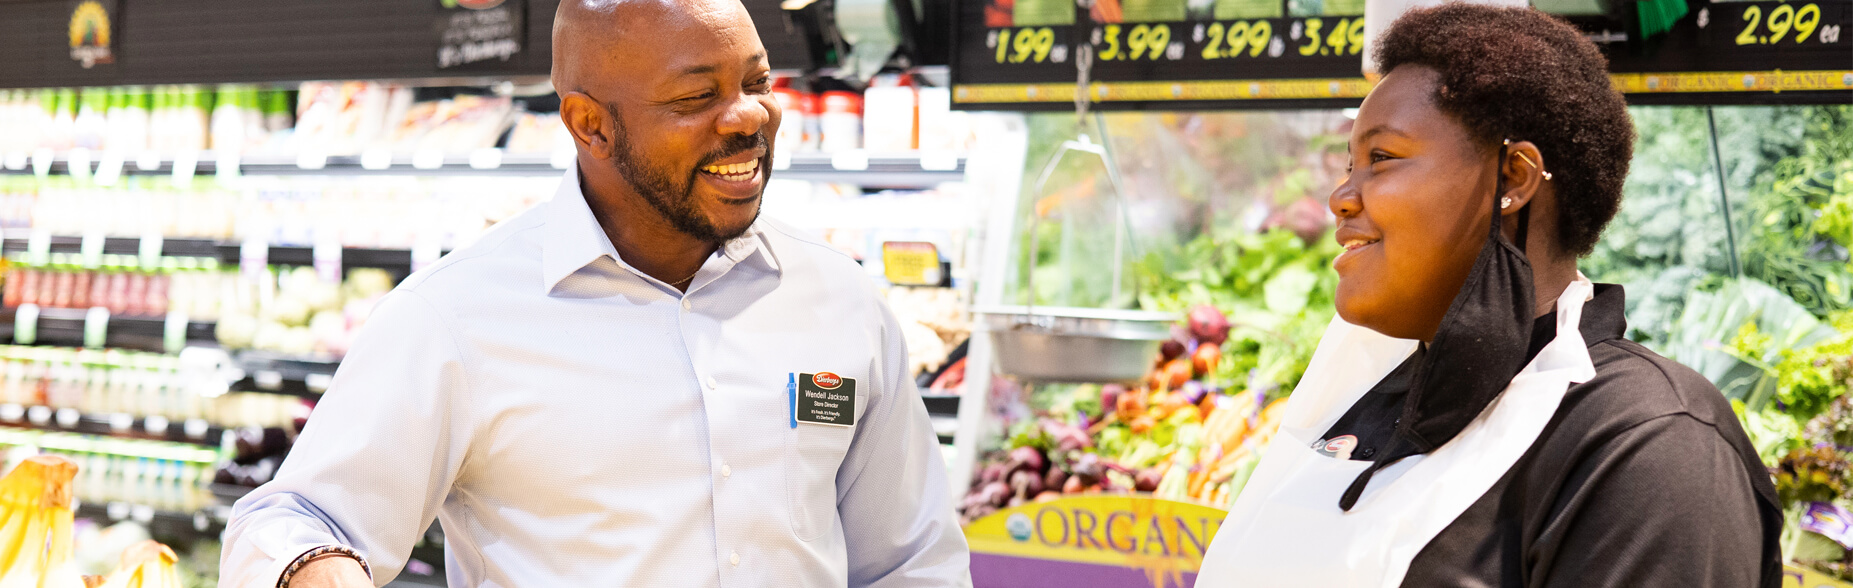 A smiling manager speaks to an employee in the produce section of a store.